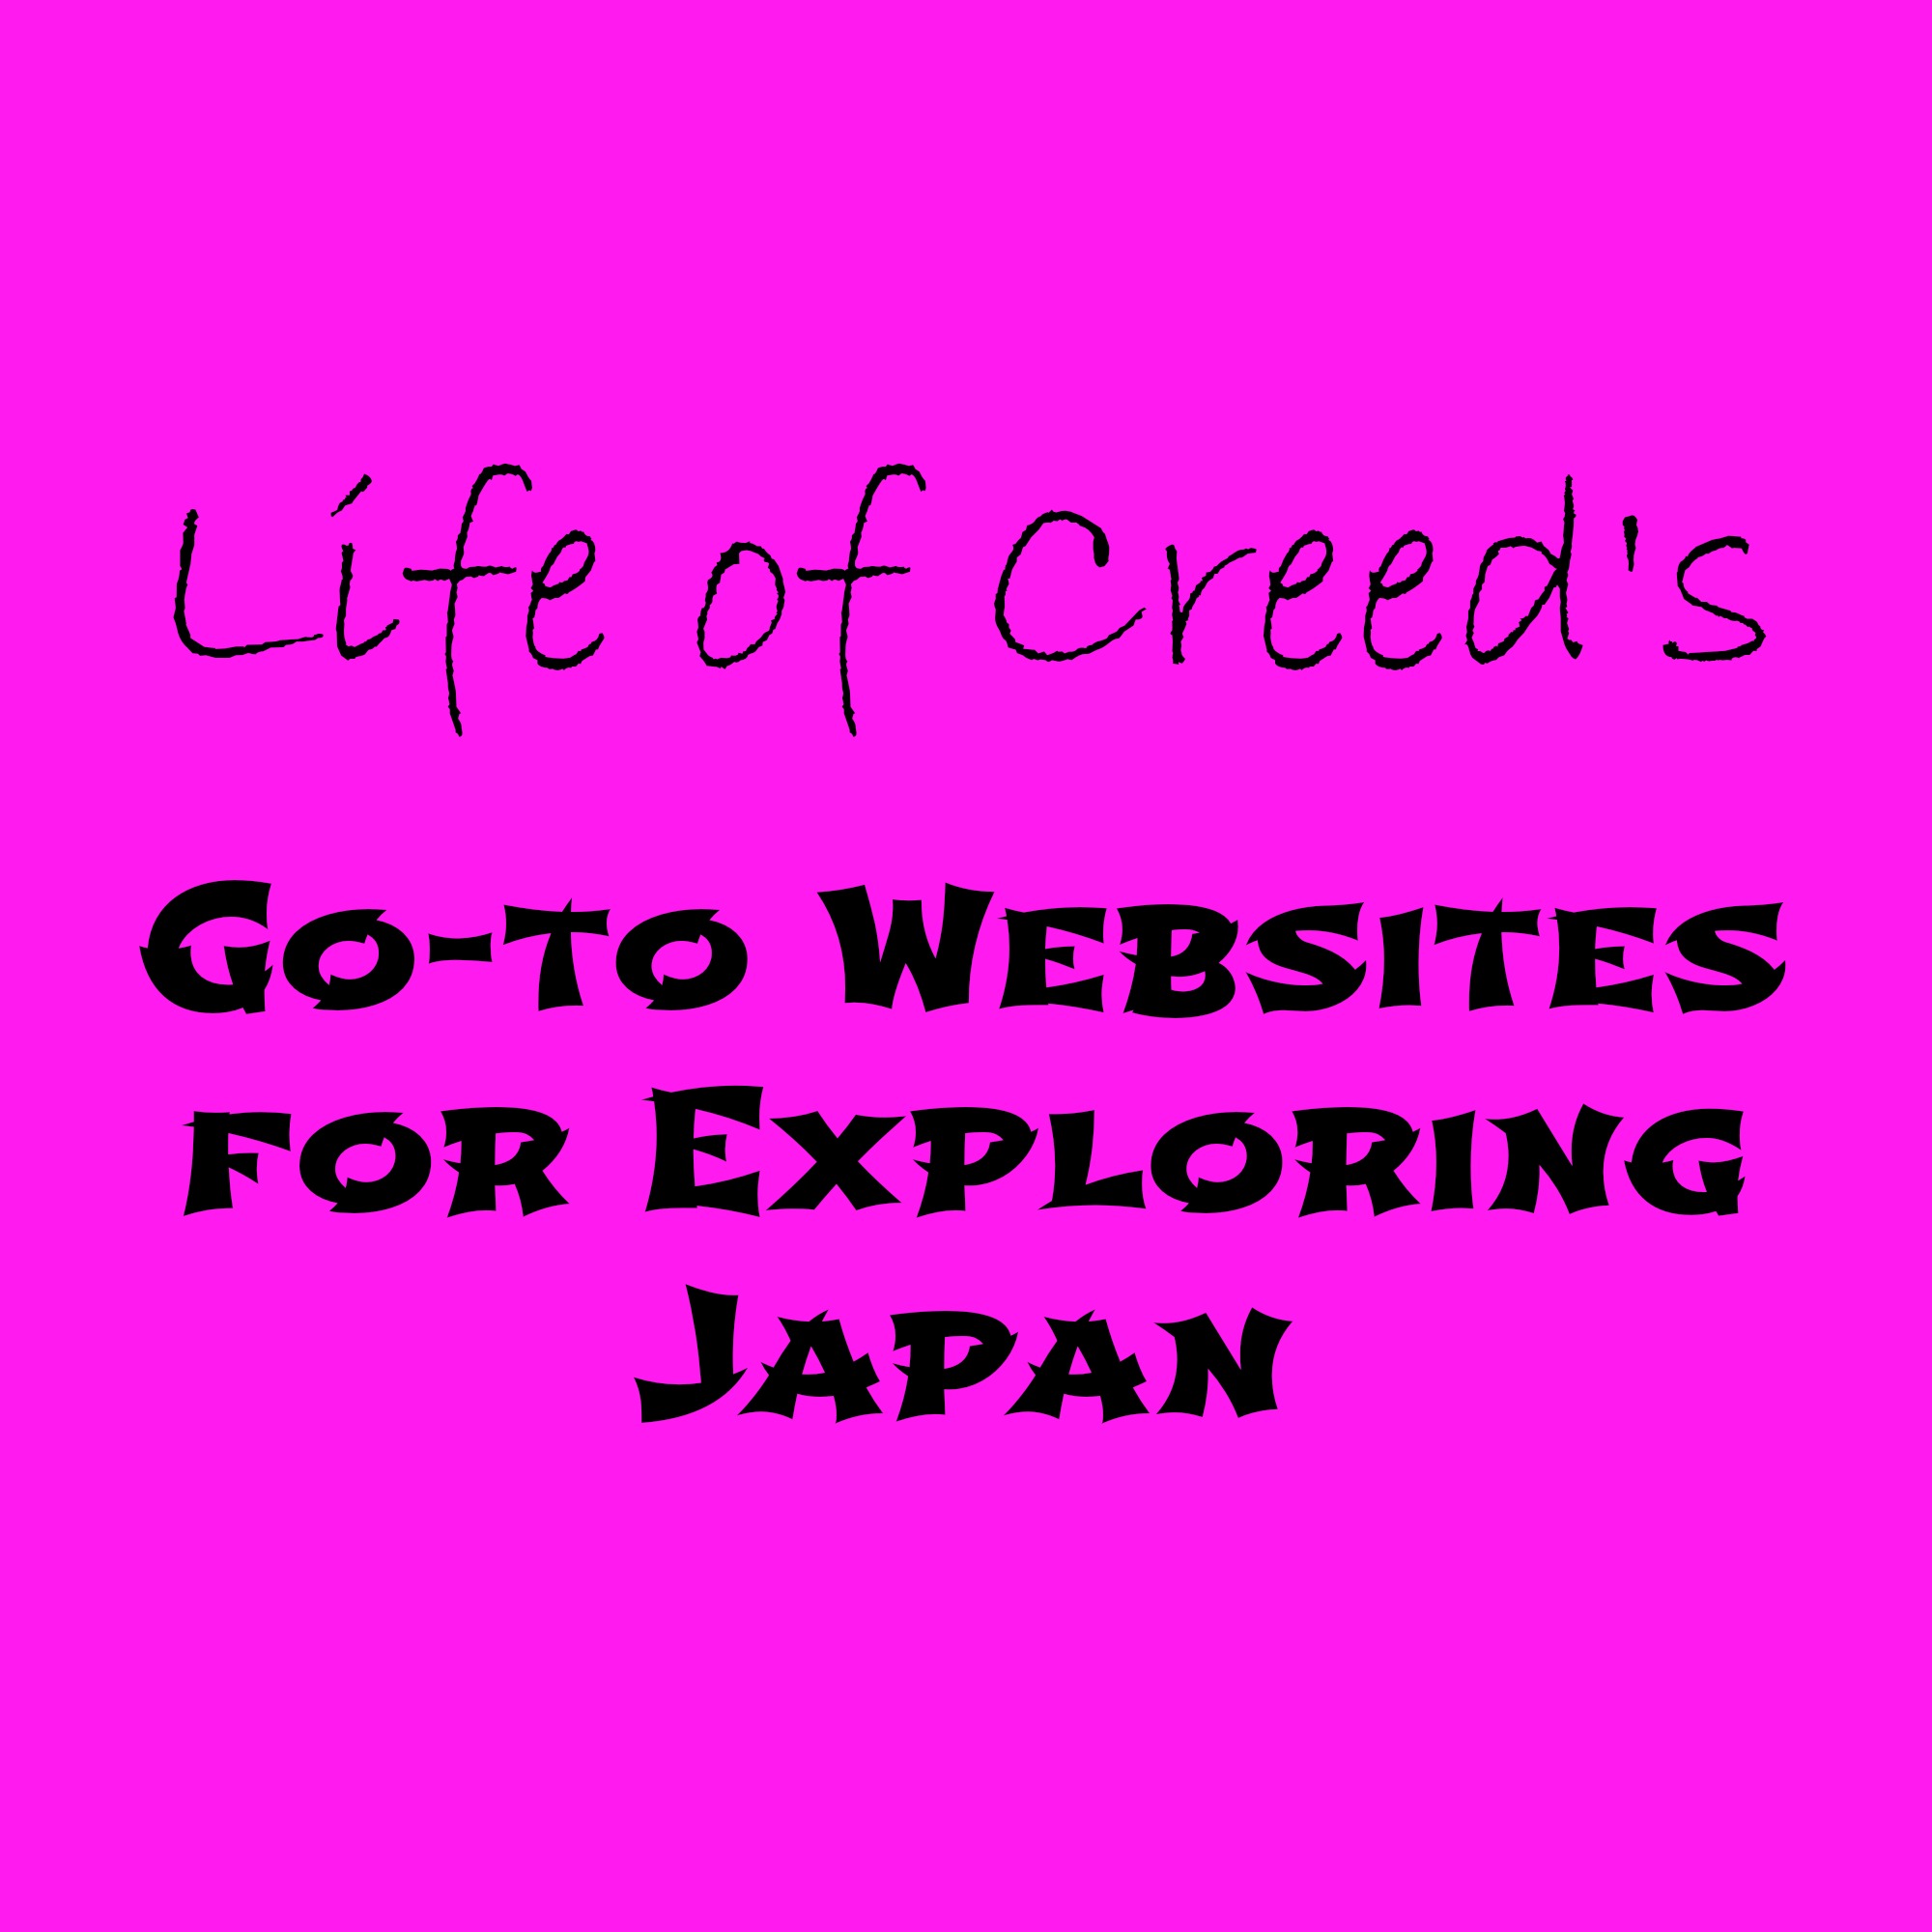 Life of Creed's Go-to websites for exploring Japan